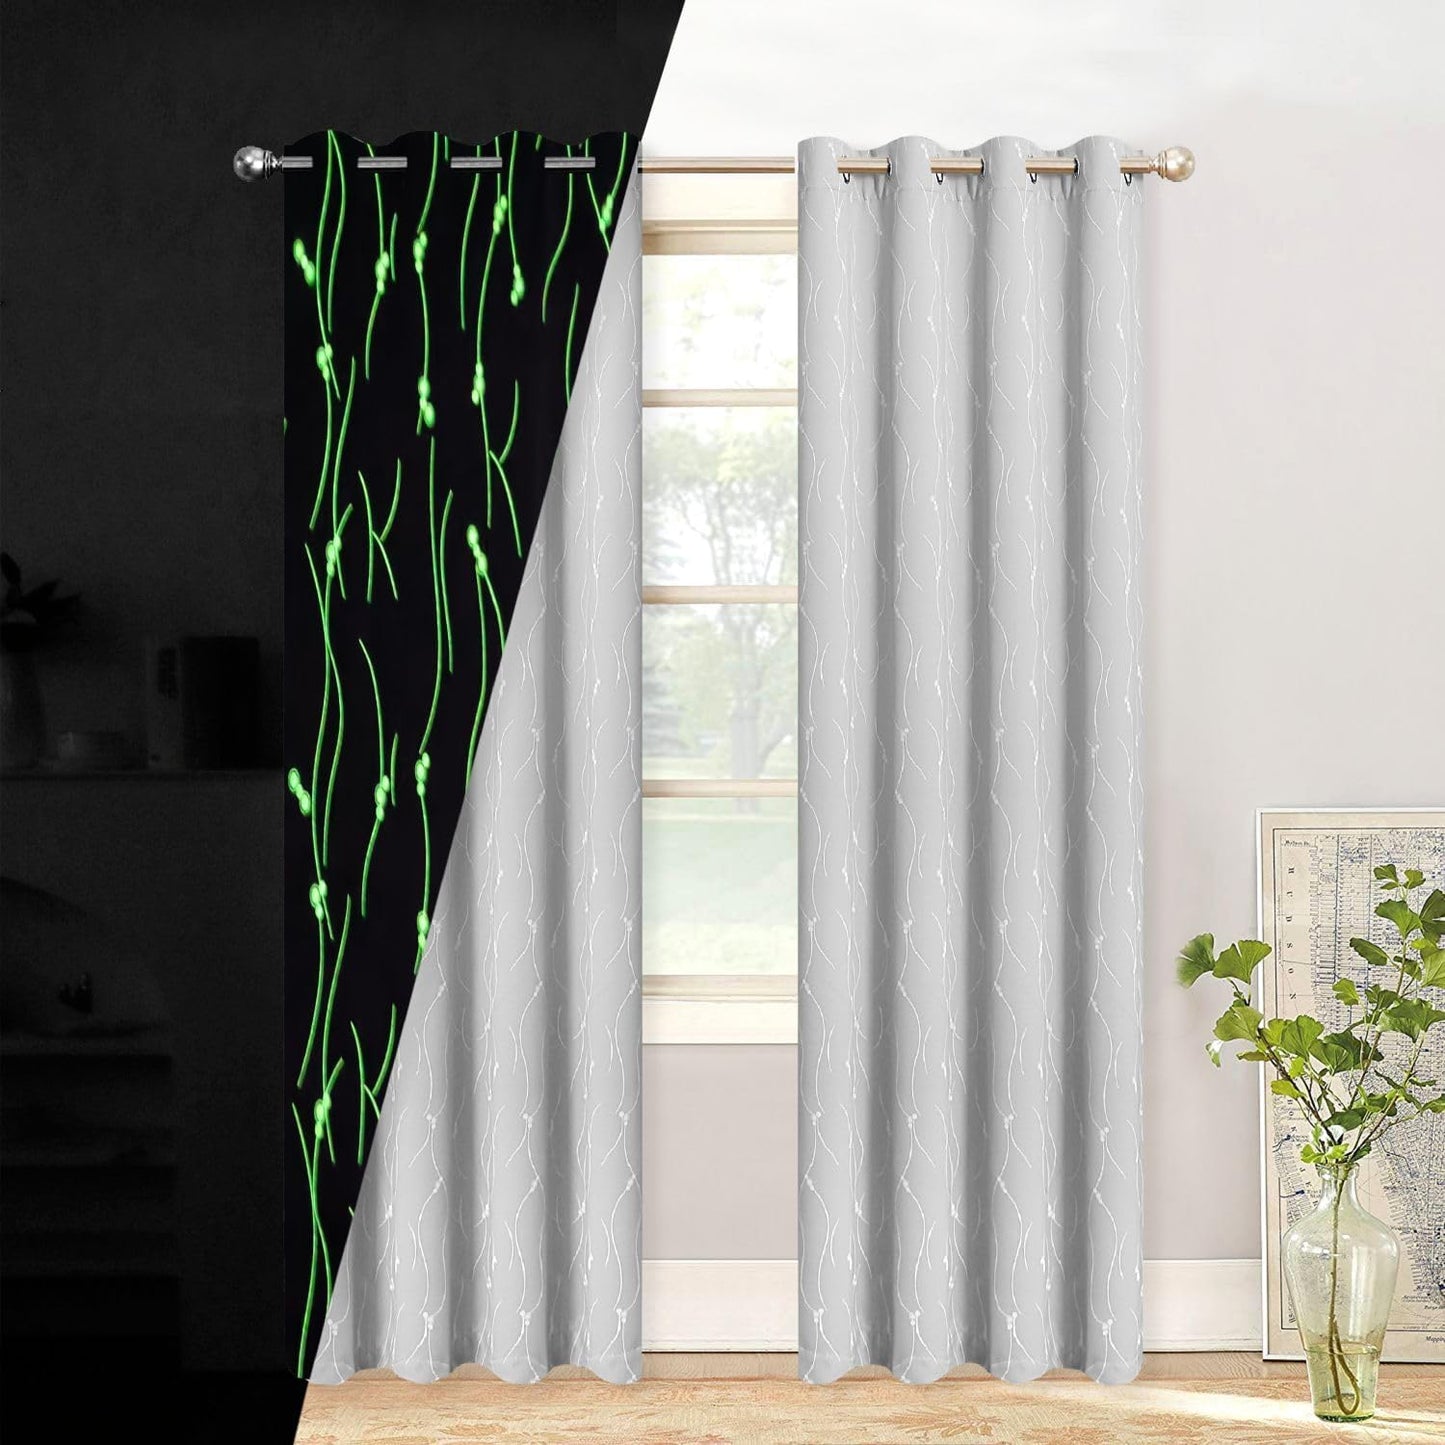 TMLTCOR Blackout Curtains for Bedroom,Bedroom Curtains for Living Room,Room Darkening Curtains 84 Inches Long,Glow in the Dark Navy Blue Curtains for Kids Bedroom,52 Inches Wide,2 Panels,Curve  TMLTCOR Grey/Curve 52"W*84"L 